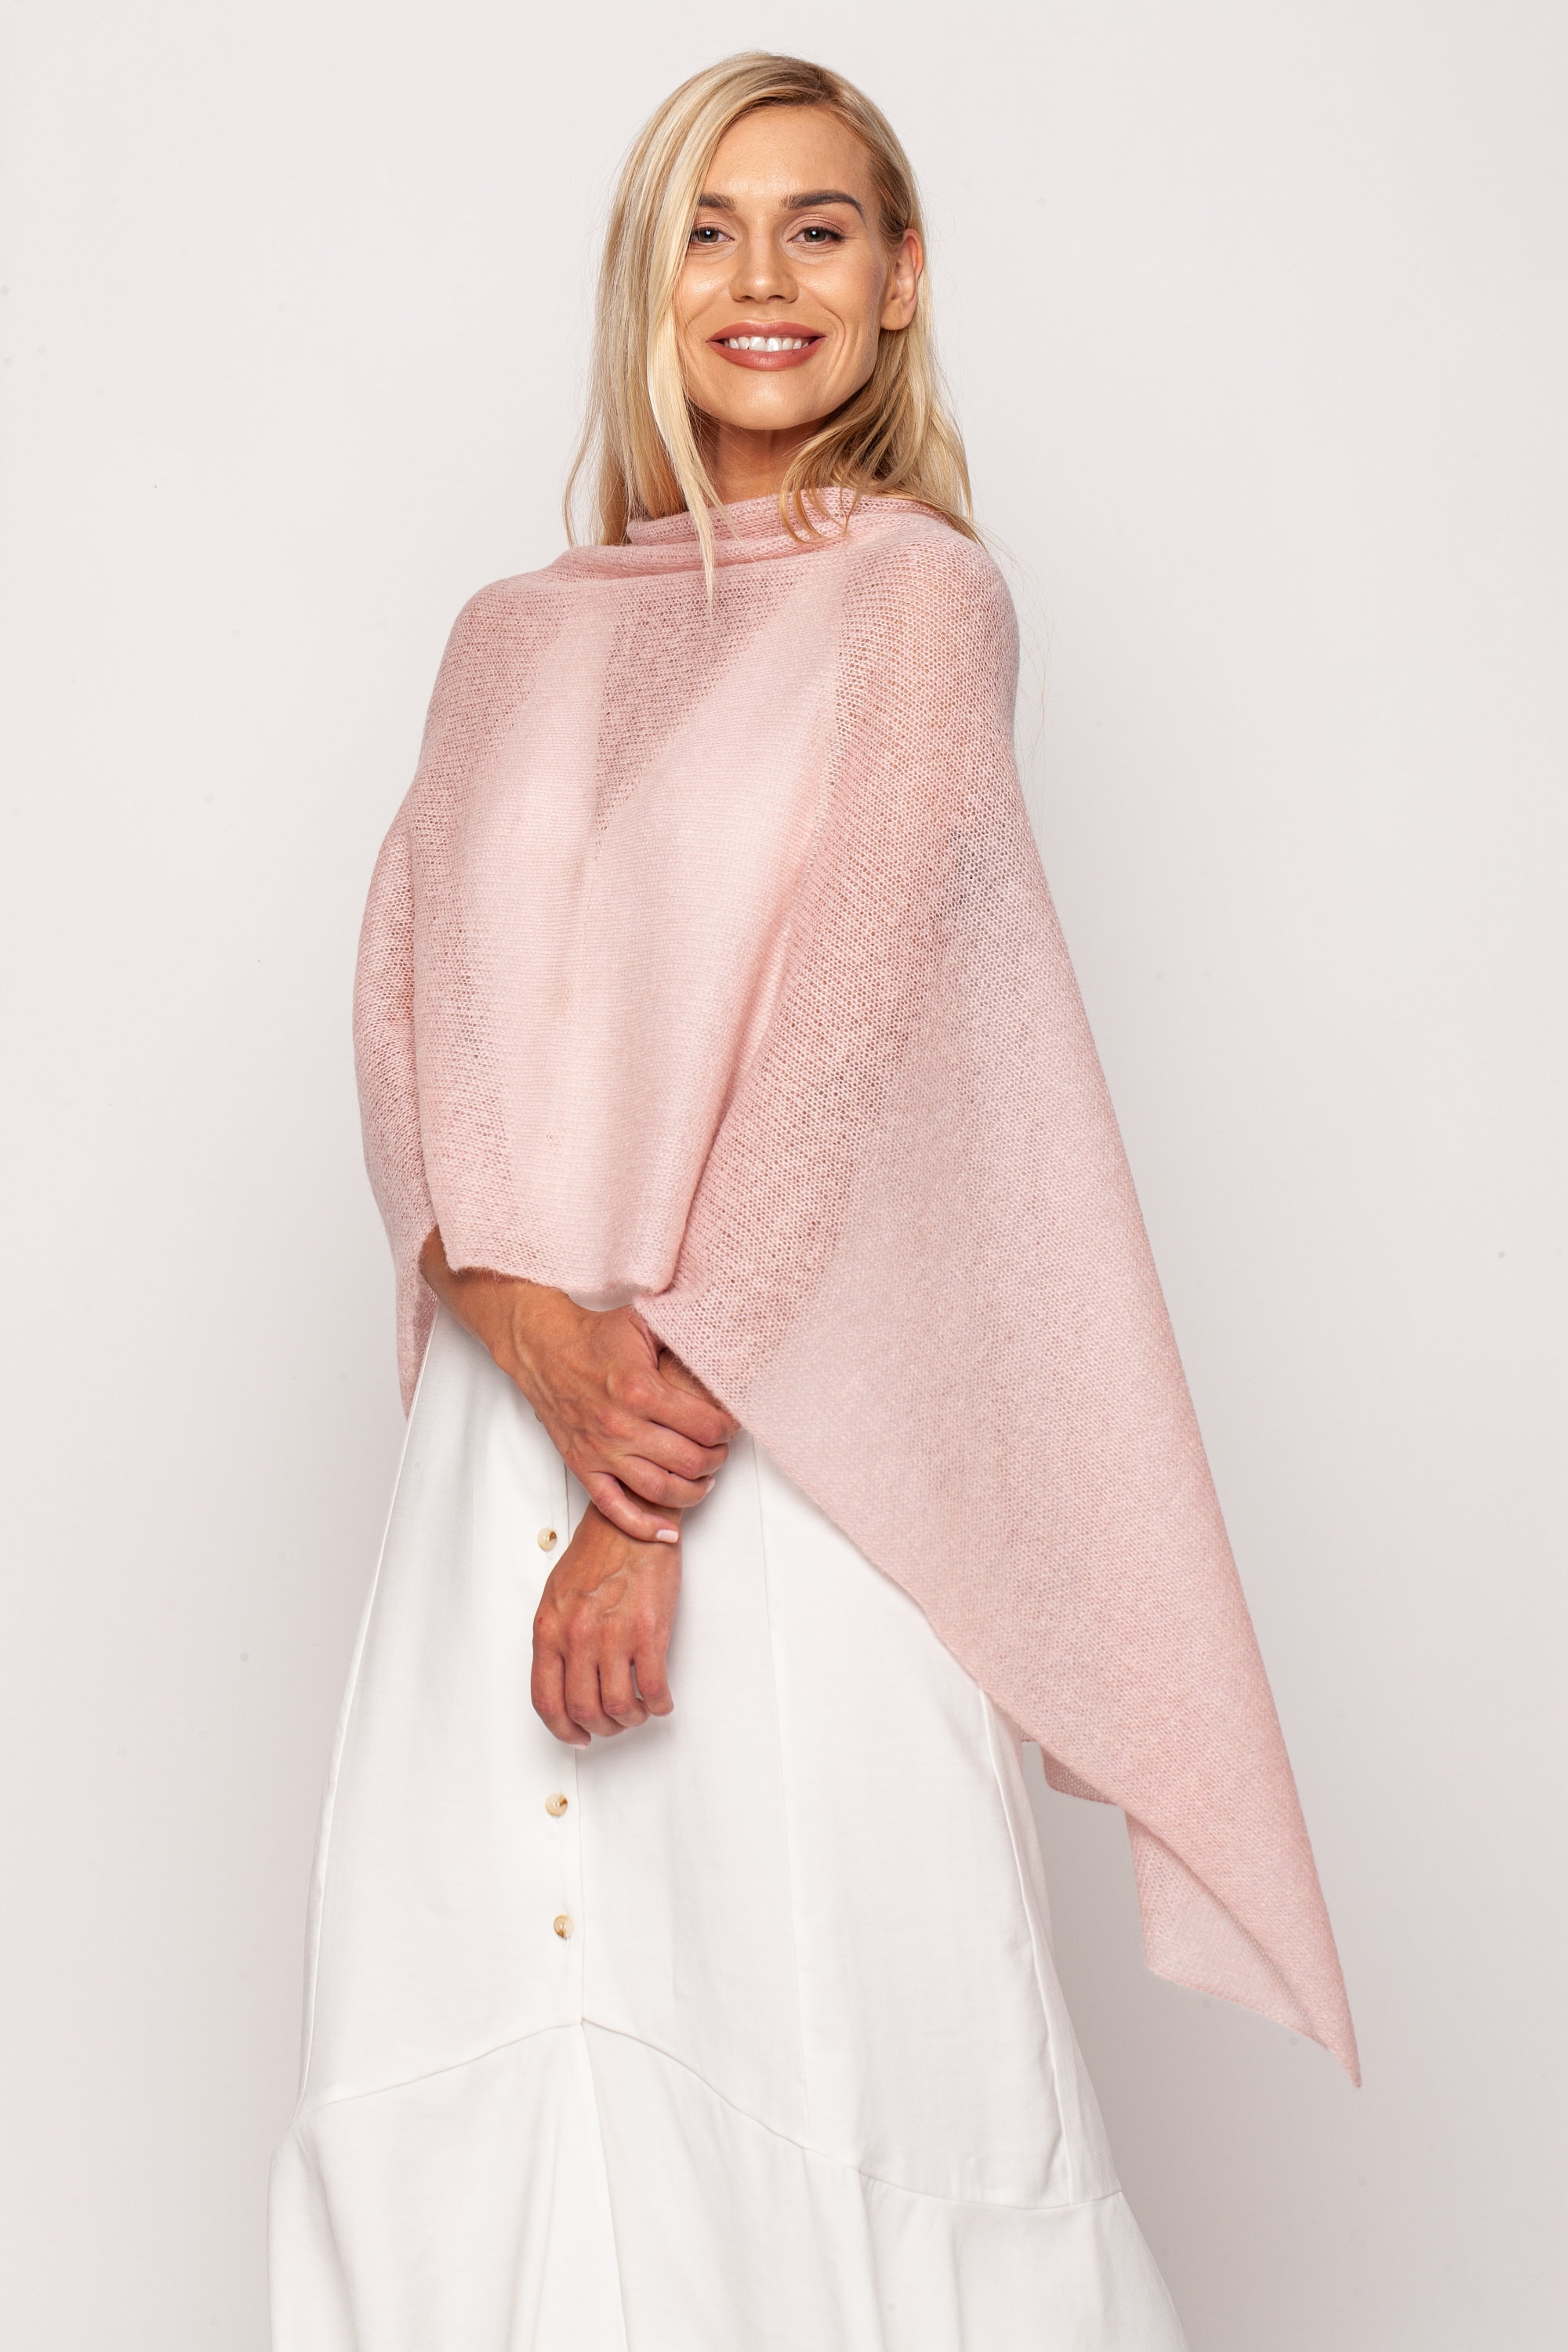 dempen Haast je Momentum Mohair Poncho Pink Cape Shawl Mohair Scarf Knitted Poncho - Etsy